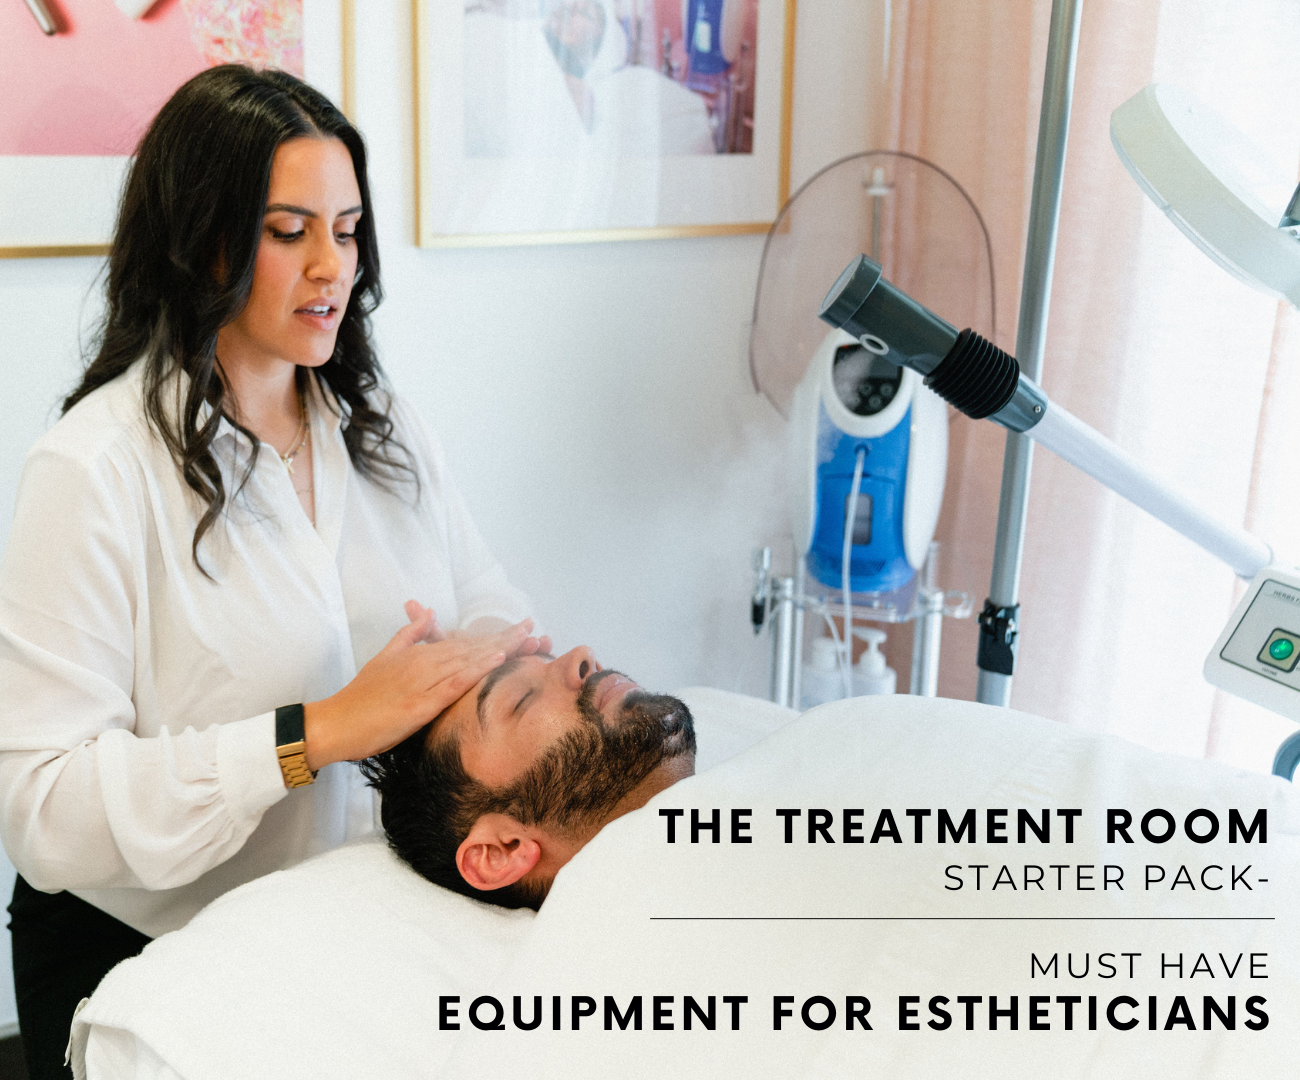 The Treatment Room Starter Pack- Must have equipment for Estheticians